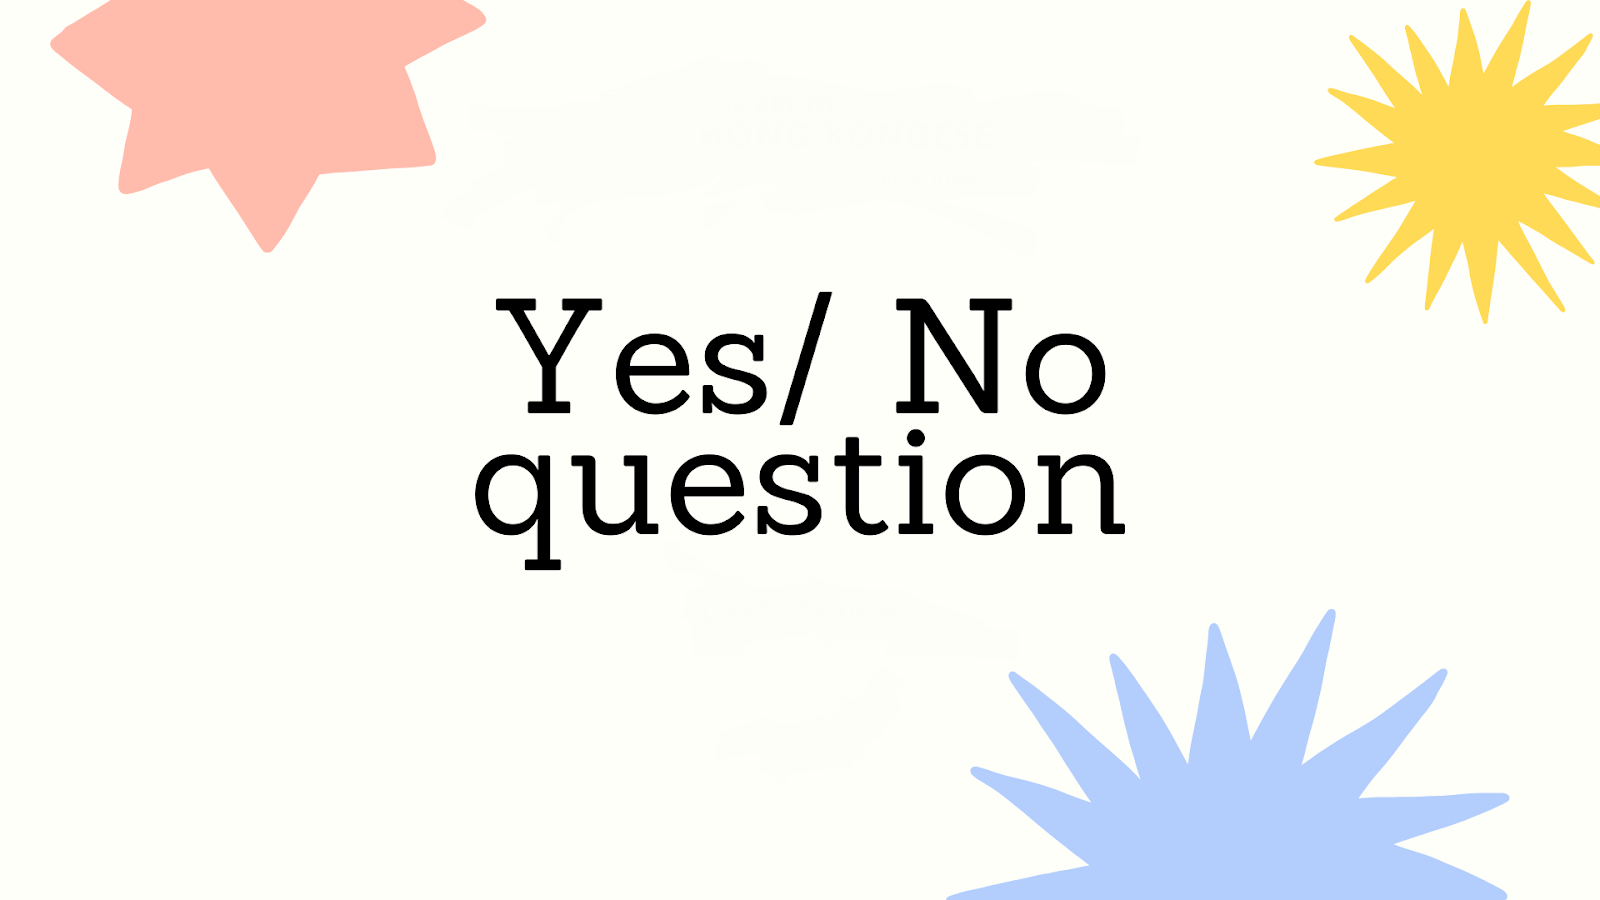 Yes/No question